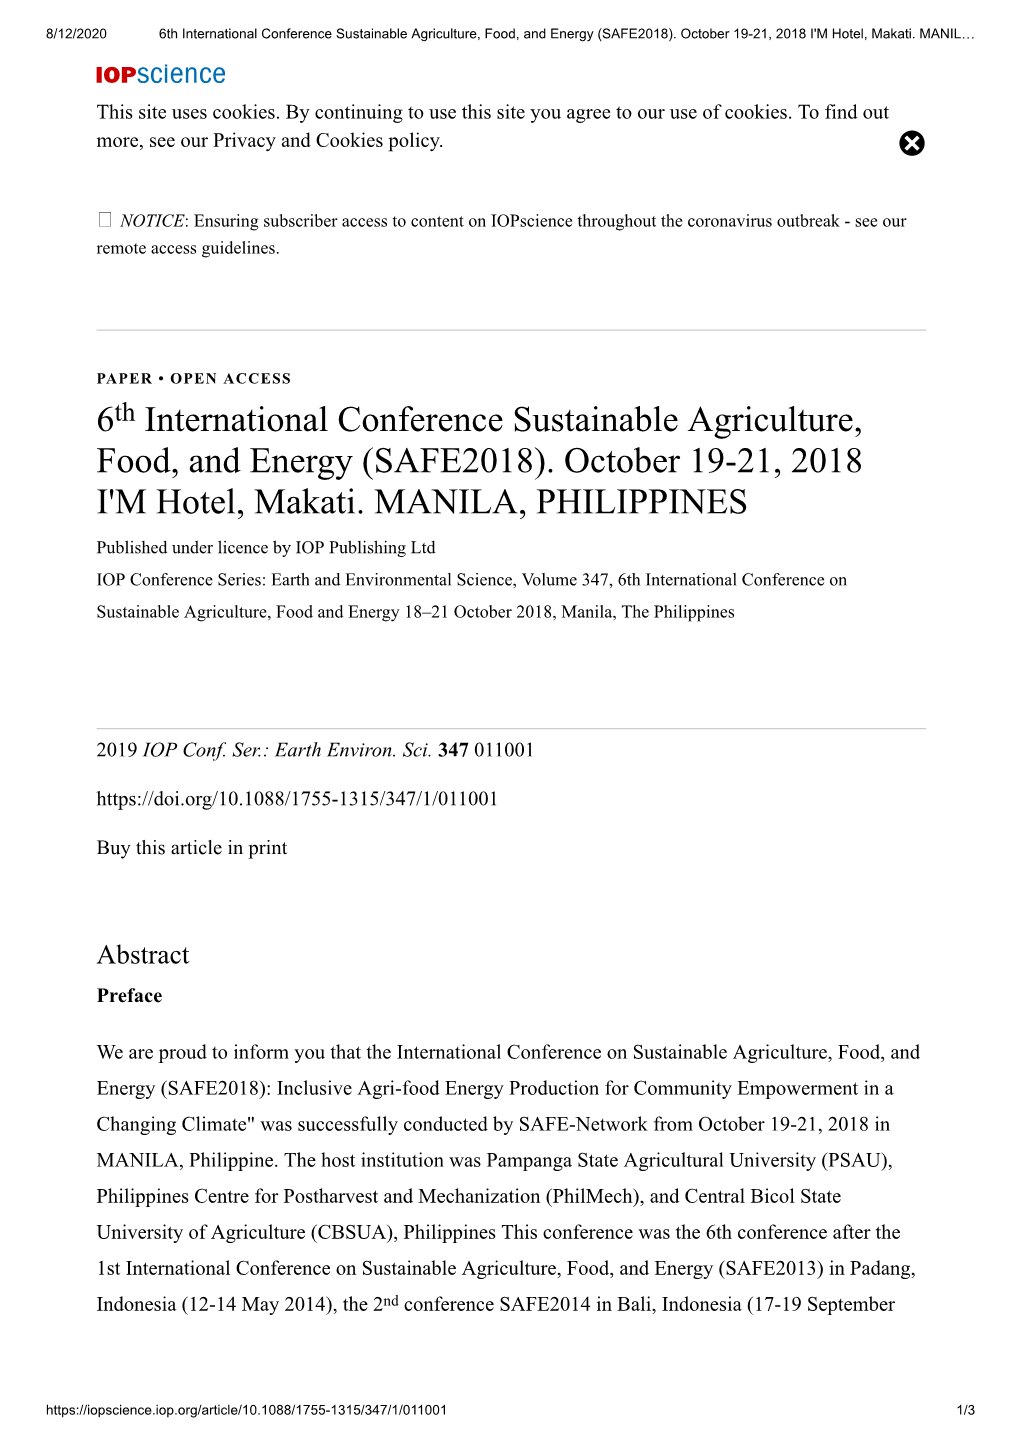 6 International Conference Sustainable Agriculture, Food, And